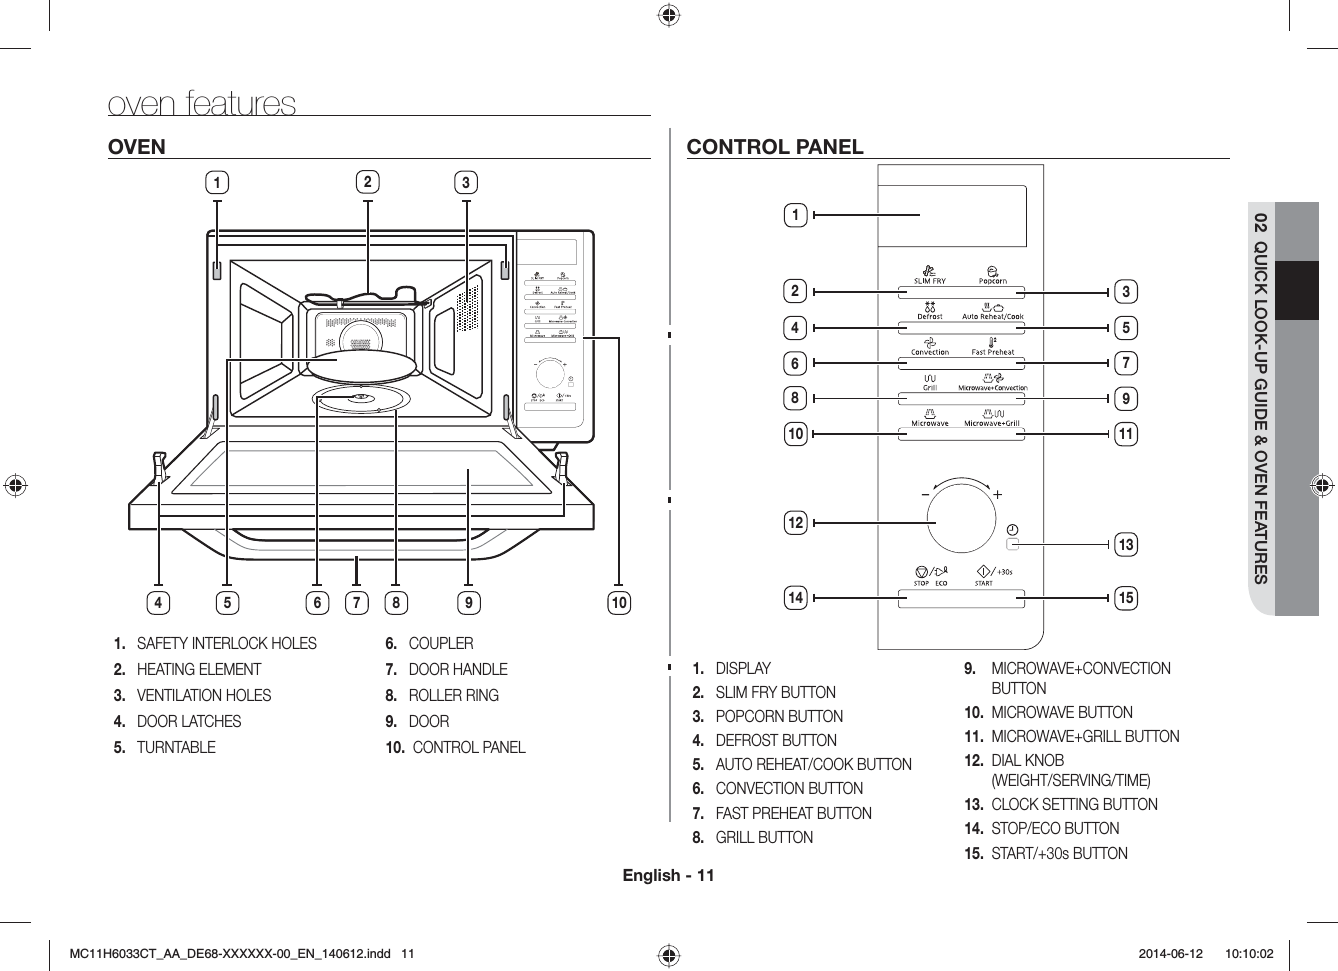 English - 1102  QUICK LOOK-UP GUIDE &amp; OVEN FEATURESoven featuresOVEN10412376 8 951.   SAFETY INTERLOCK HOLES2.   HEATING ELEMENT3.   VENTILATION HOLES4.   DOOR LATCHES5.   TURNTABLE6.   COUPLER7.   DOOR HANDLE8.   ROLLER RING9.   DOOR10.   CONTROL PANELCONTROL PANEL1.  DISPLAY2.  SLIM FRY BUTTON3.  POPCORN BUTTON4.  DEFROST BUTTON5.  AUTO REHEAT/COOK BUTTON6.  CONVECTION BUTTON7.  FAST PREHEAT BUTTON8.  GRILL BUTTON9.    MICROWAVE+CONVECTION BUTTON10.   MICROWAVE BUTTON11.   MICROWAVE+GRILL BUTTON12.   DIAL KNOB (WEIGHT/SERVING/TIME)13.   CLOCK SETTING BUTTON14.   STOP/ECO BUTTON15.   START/+30s BUTTON268112144109351511713MC11H6033CT_AA_DE68-XXXXXX-00_EN_140612.indd   11  